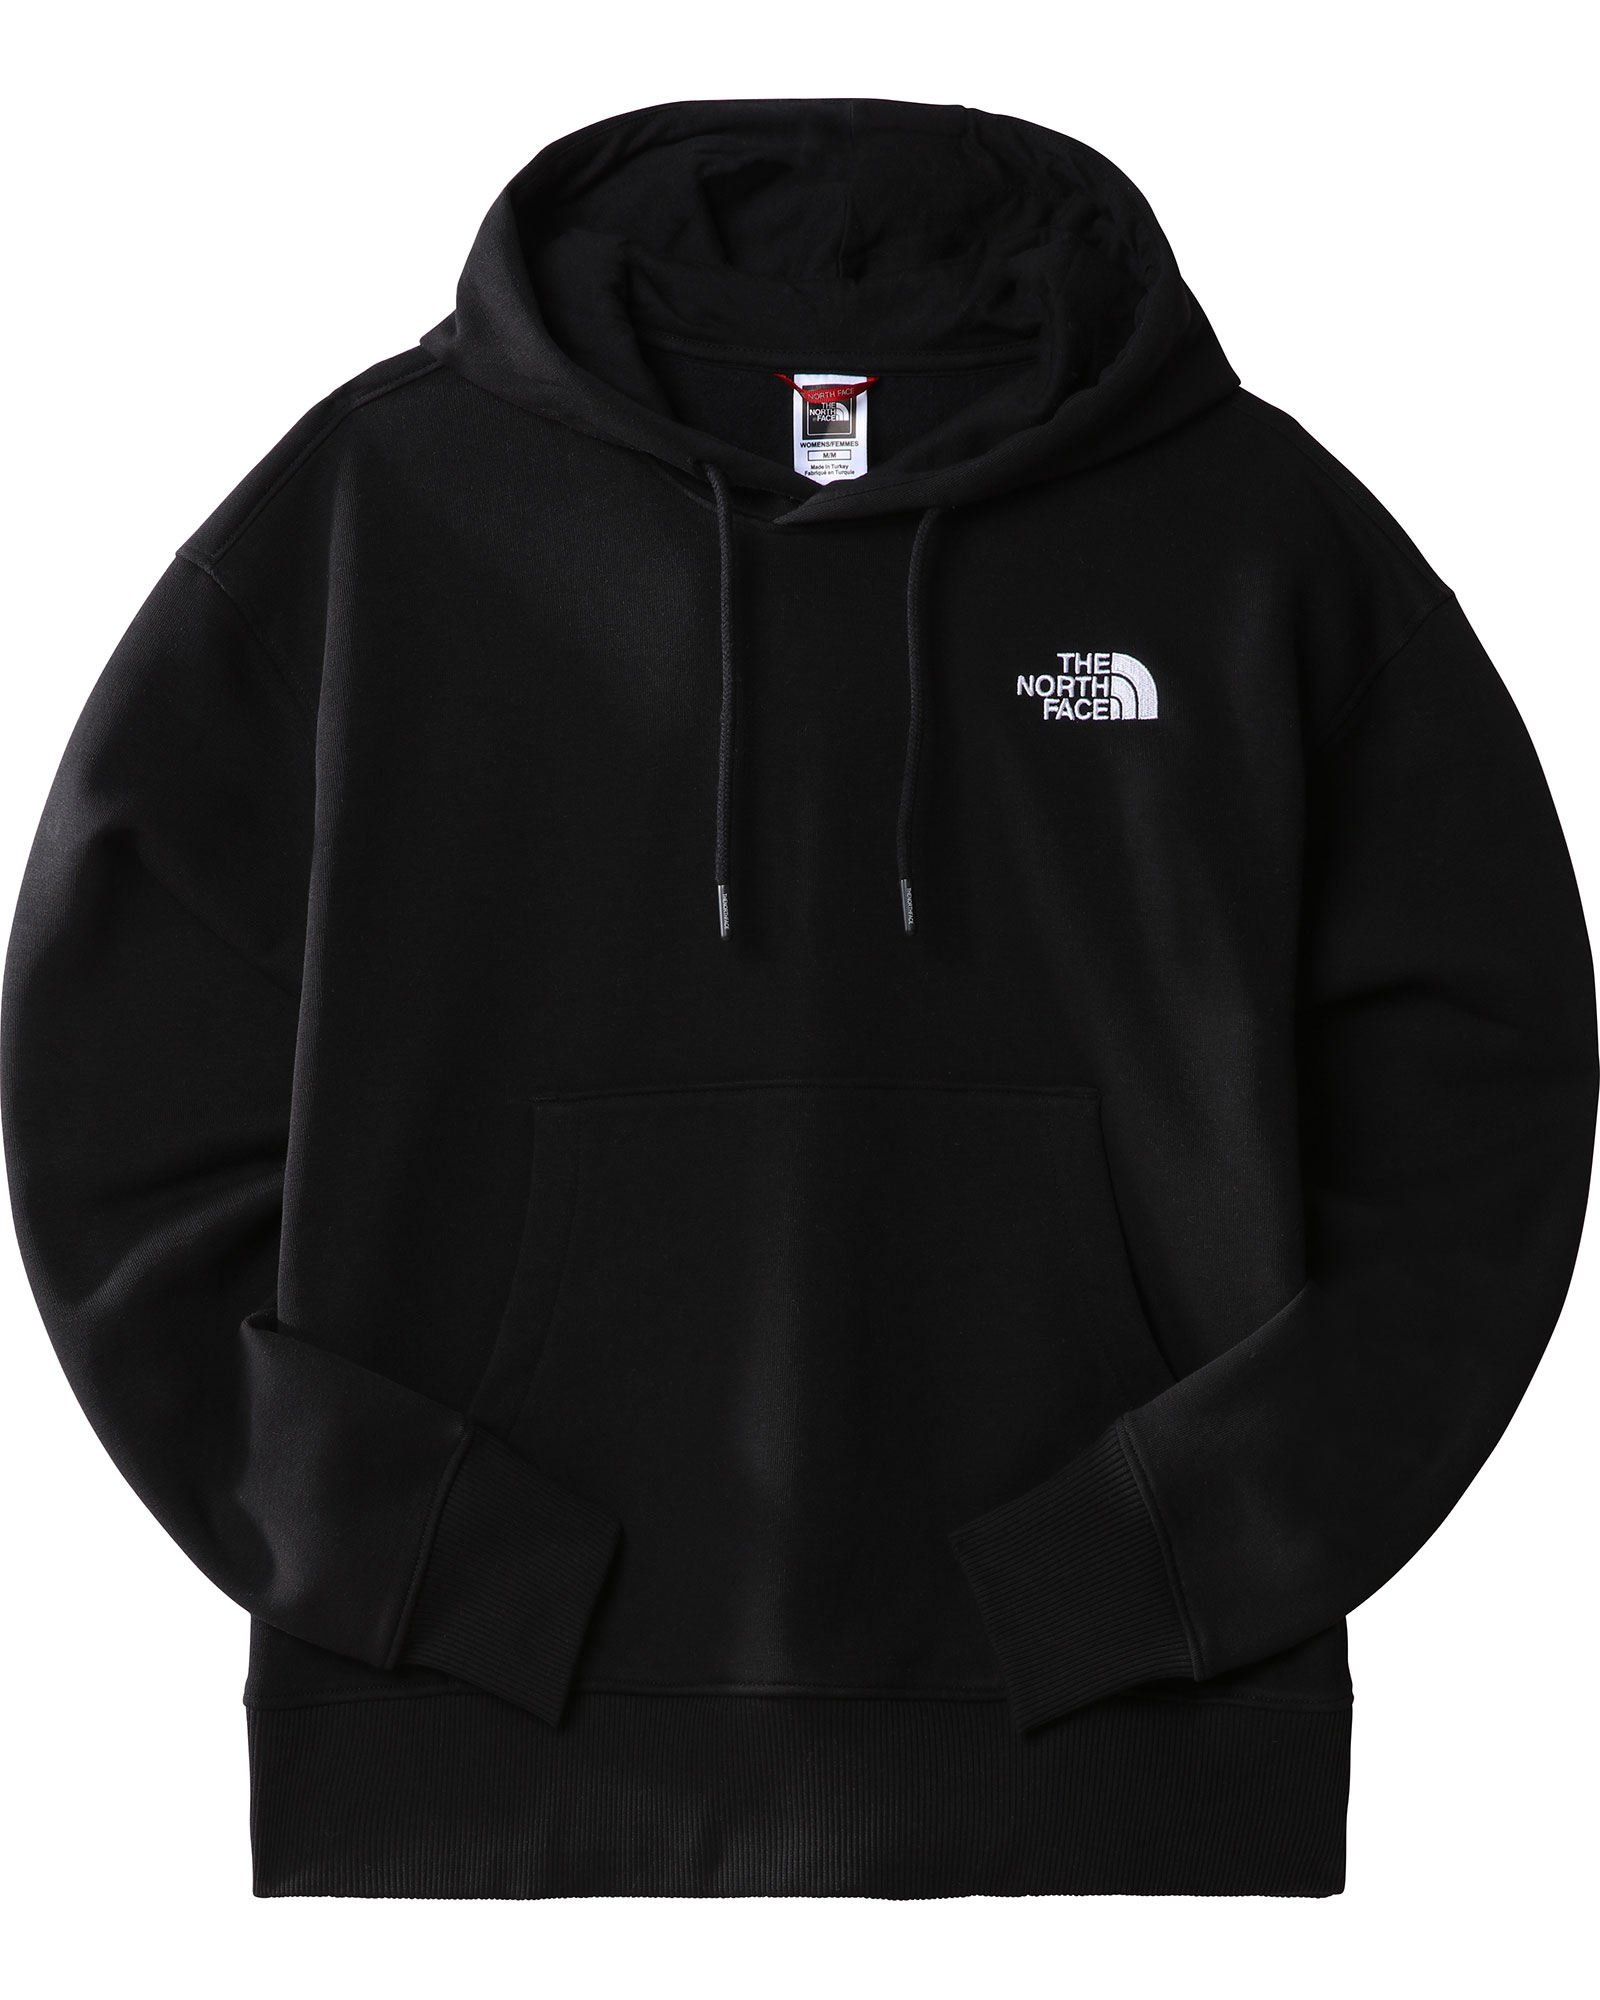 The North Face Women’s Essential Hoodie - TNF Black L